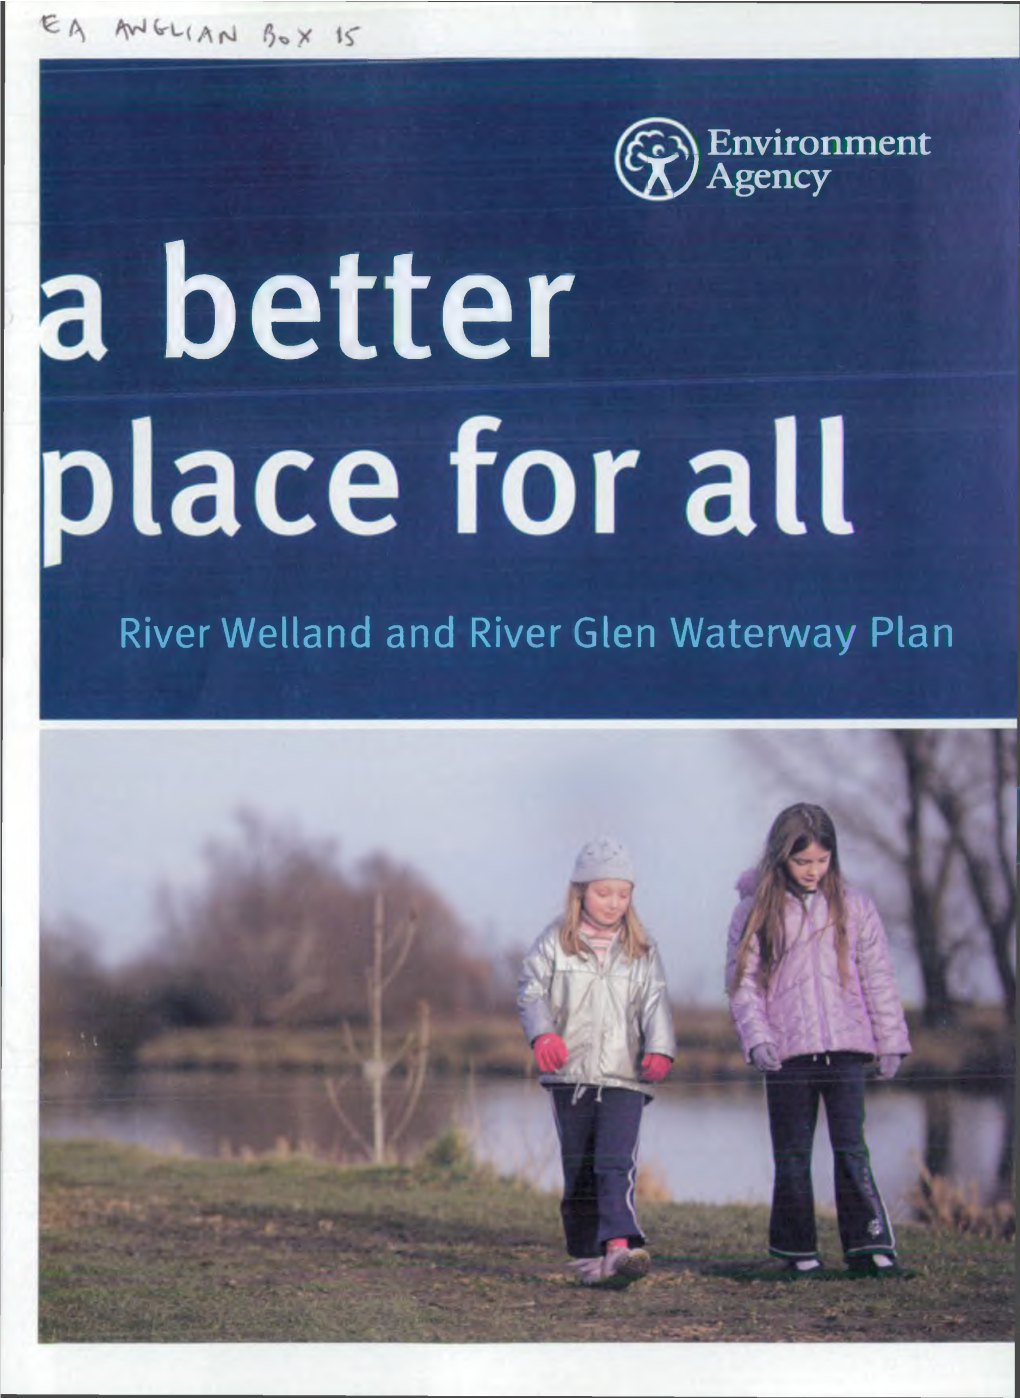 River Welland and River Glen Waterway Plan We Are the Environment Agency